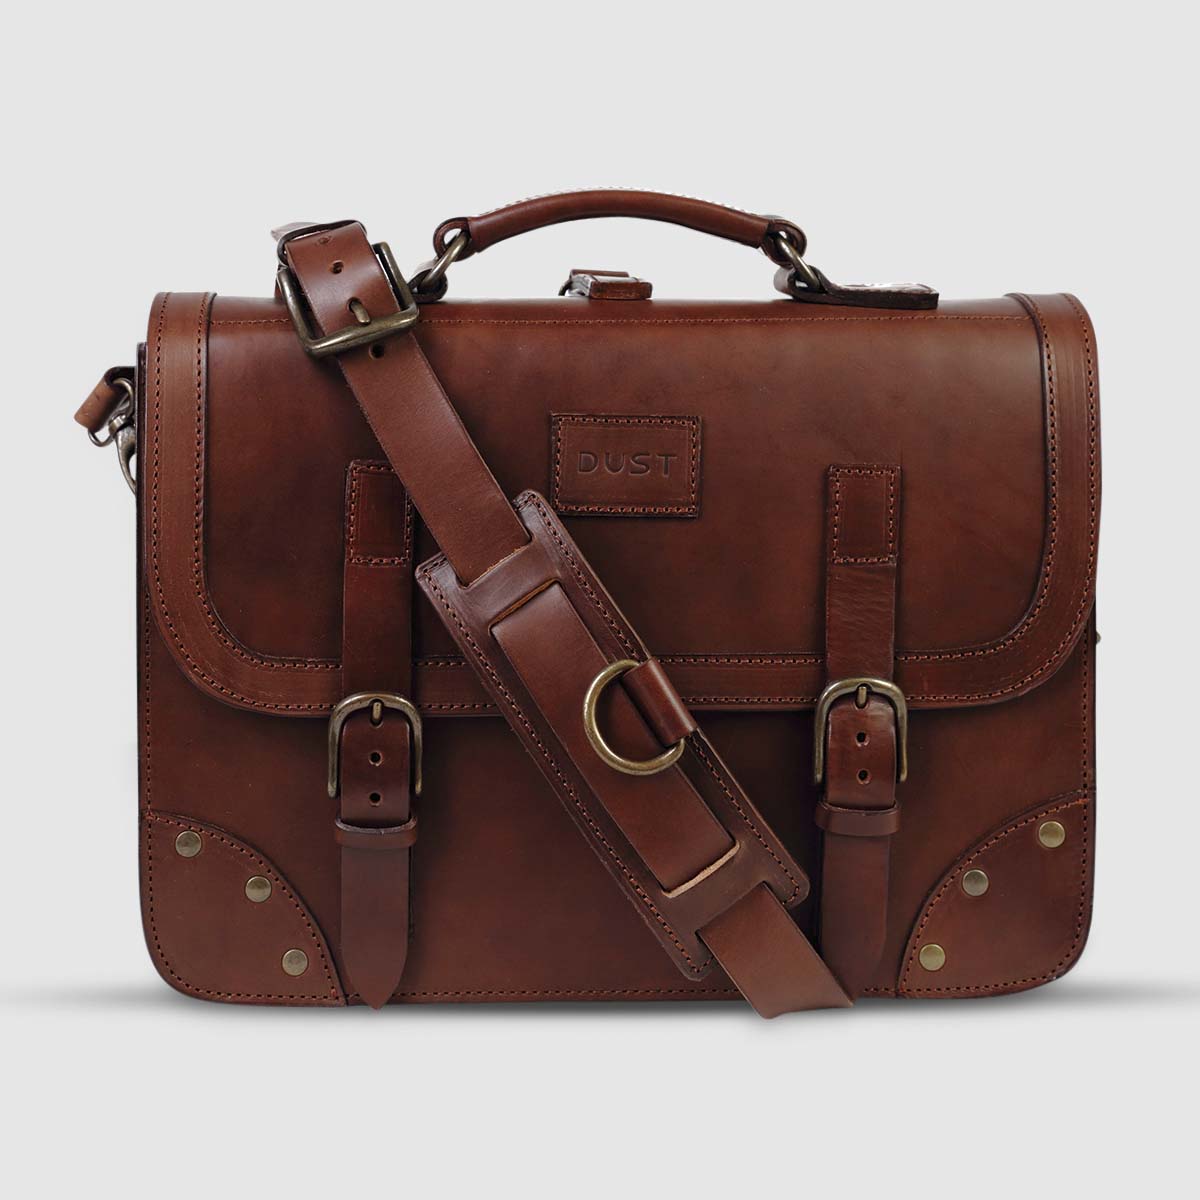 The Dust Company Classic Leather Briefcase The Dust on sale 2022